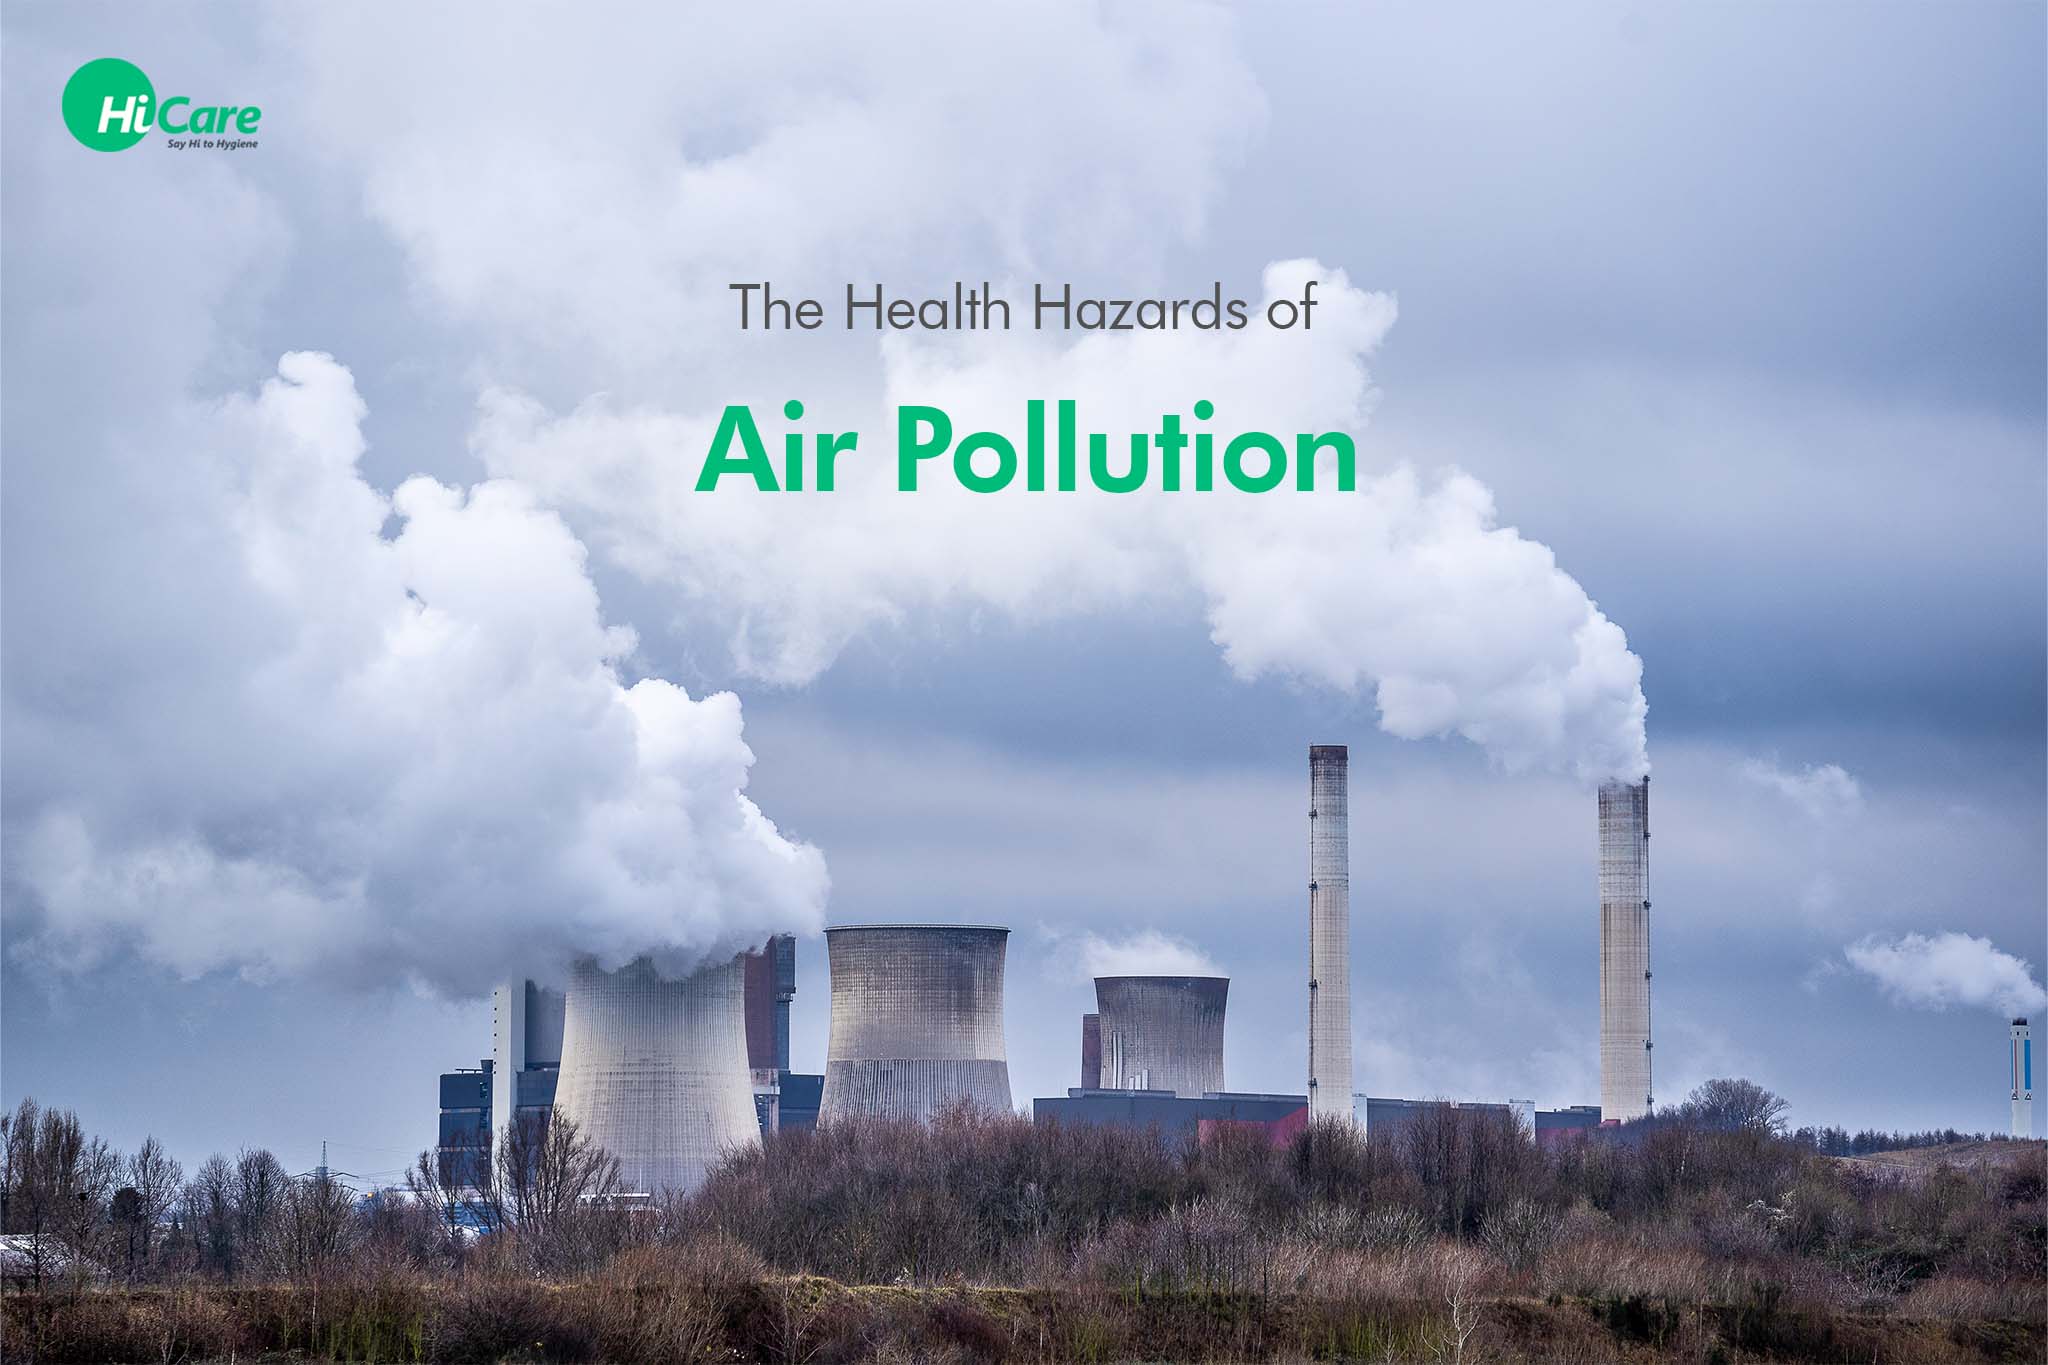 The Health Hazards of Air Pollution